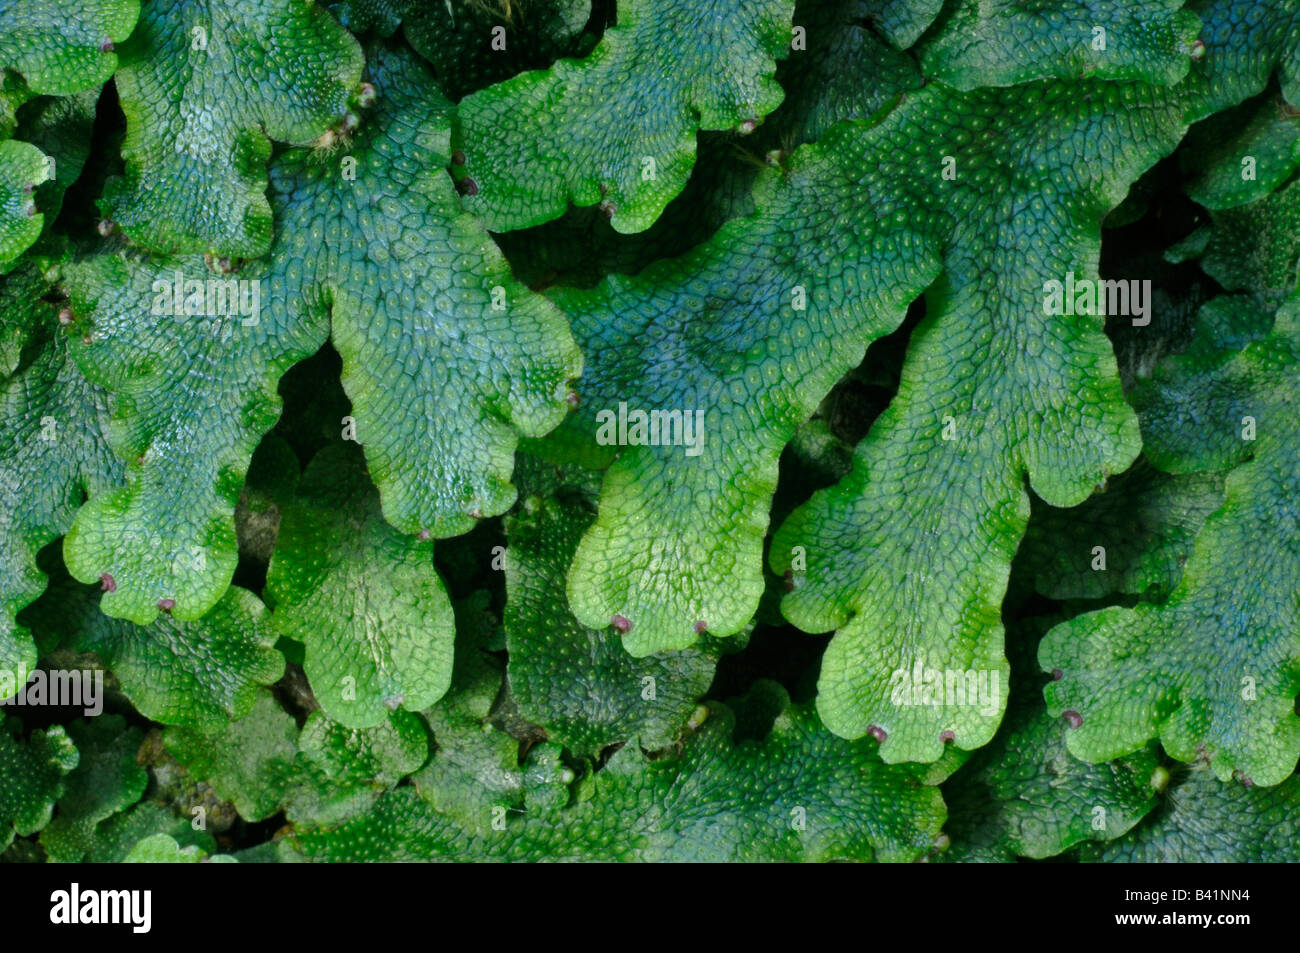 Liverwort (Marchantia polymorpha) with fruiting bodies Stock Photo